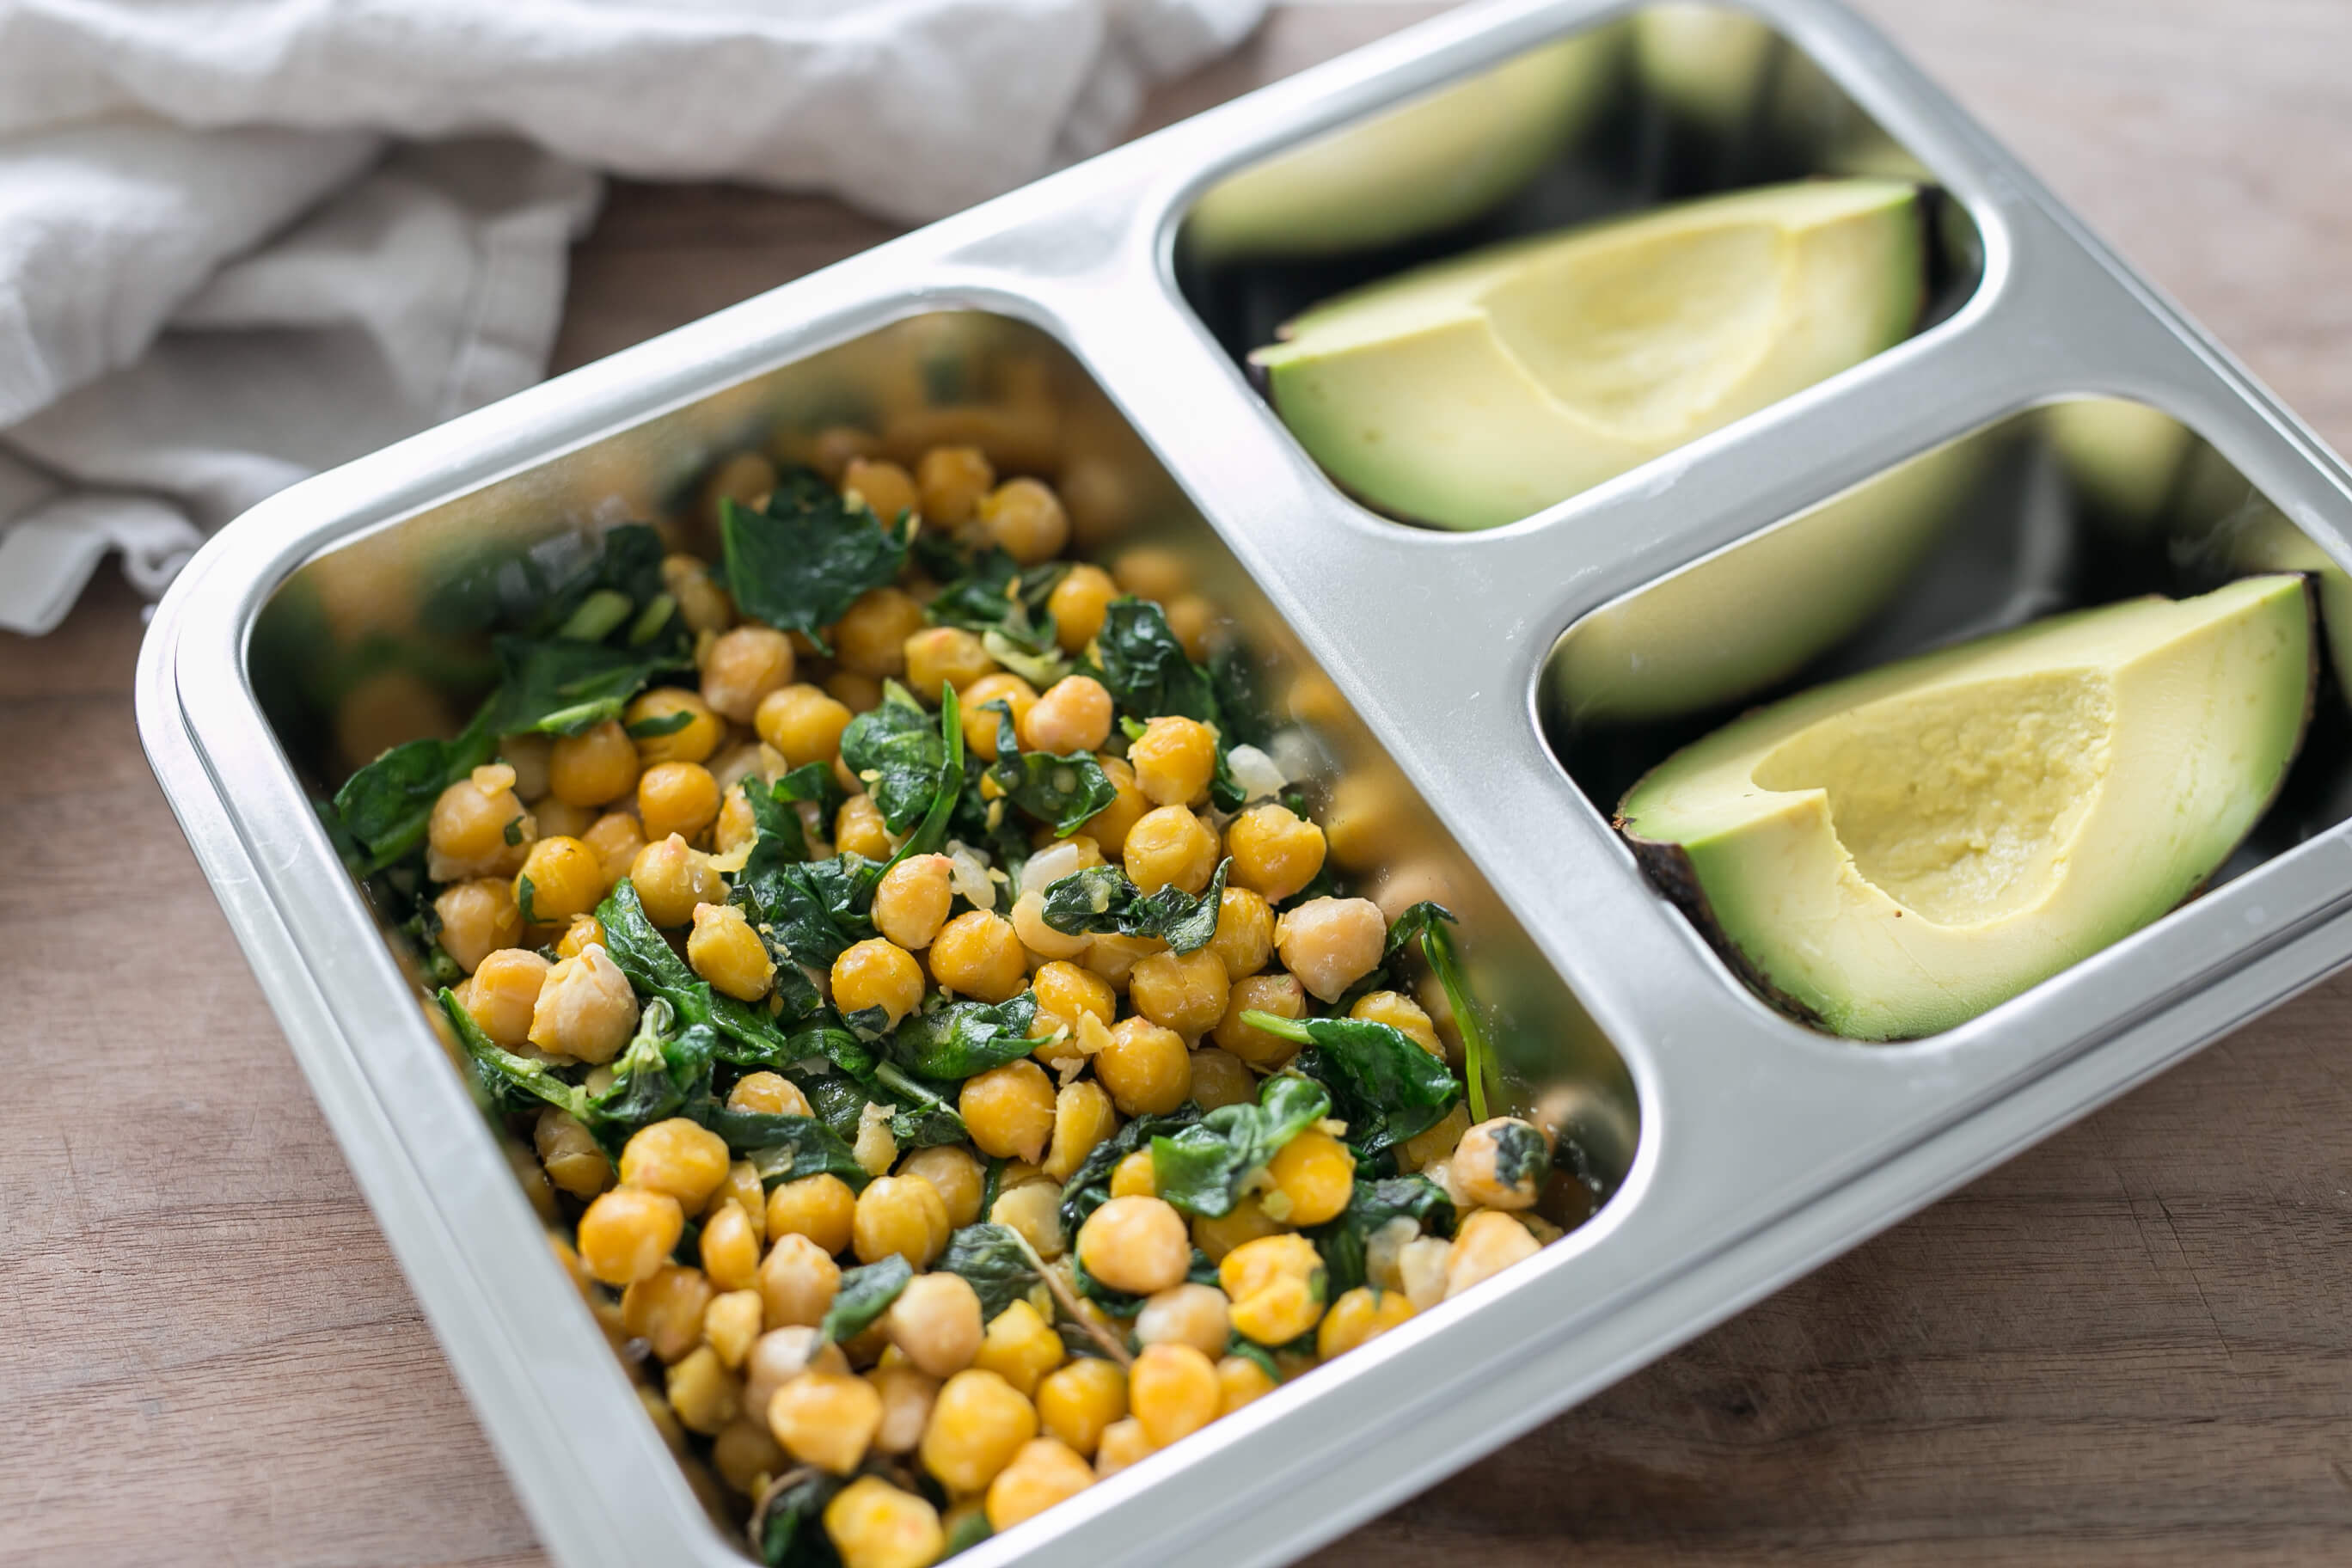 20 High Protein, Plant-Based Meals Your Clients Will Love: Herbed Chickpeas with Avocado